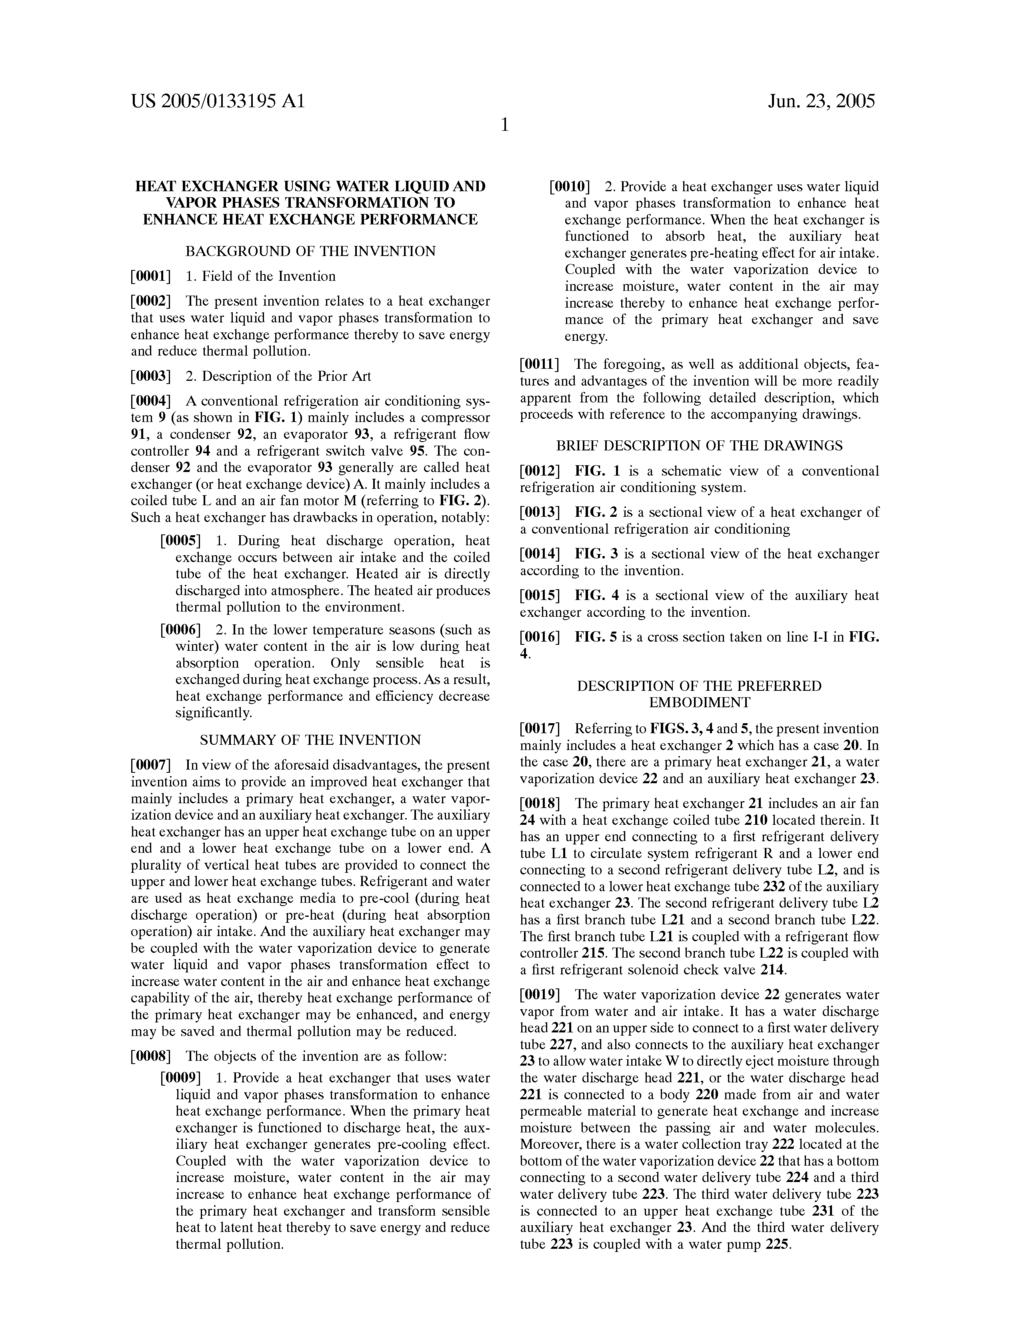 US 2005/O133195 A1 Jun. 23, 2005 HEAT EXCHANGER USING WATER LIQUID AND WAPOR PHASESTRANSFORMATION TO ENHANCE HEAT EXCHANGE PERFORMANCE BACKGROUND OF THE INVENTION 0001) 1.